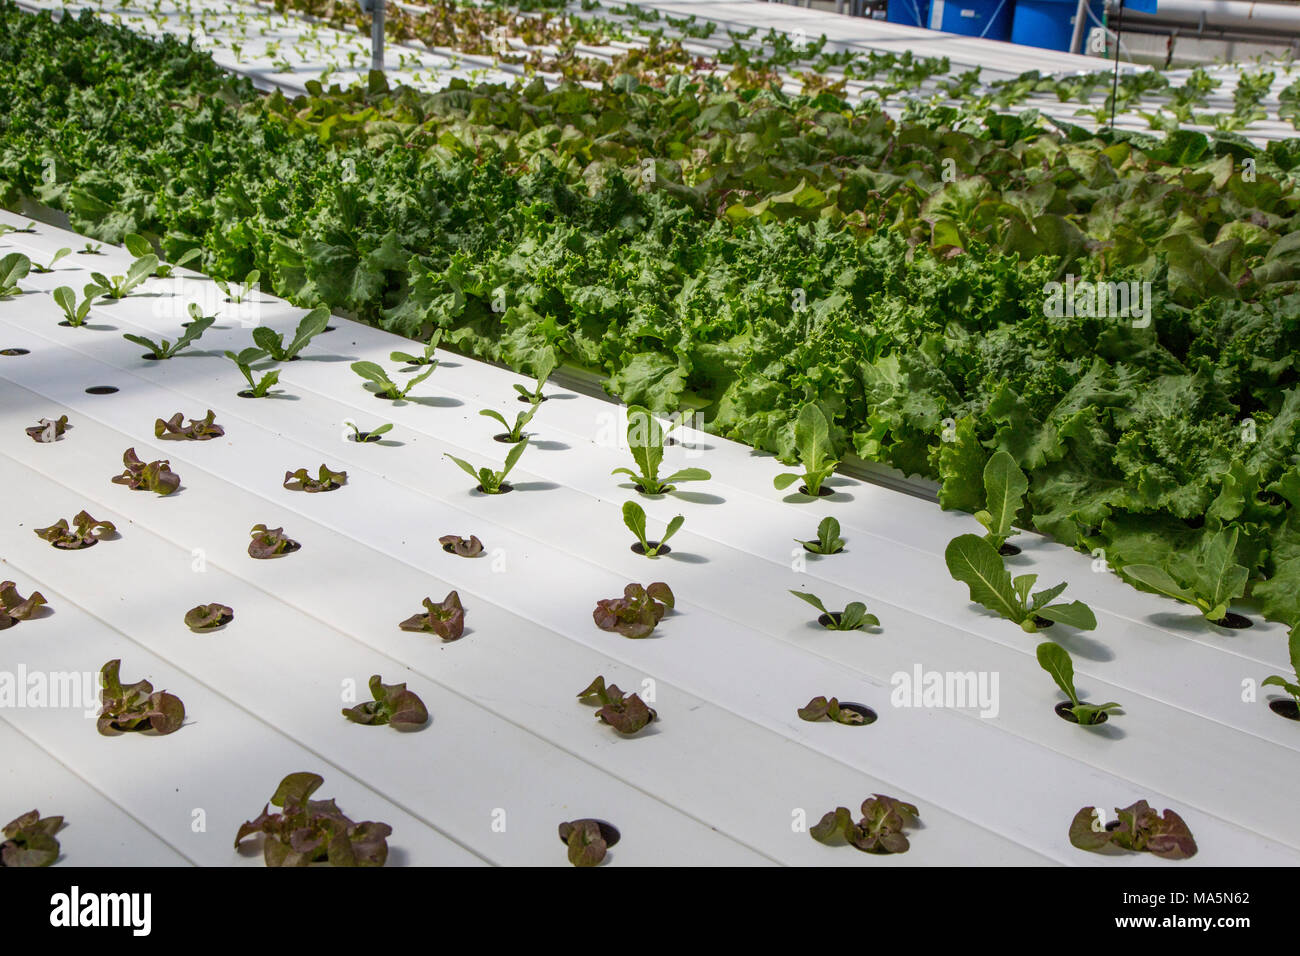 Hydroponic Agriculture.  Greenhouse Growing Lettuce.    Dyersville, Iowa, USA. Stock Photo